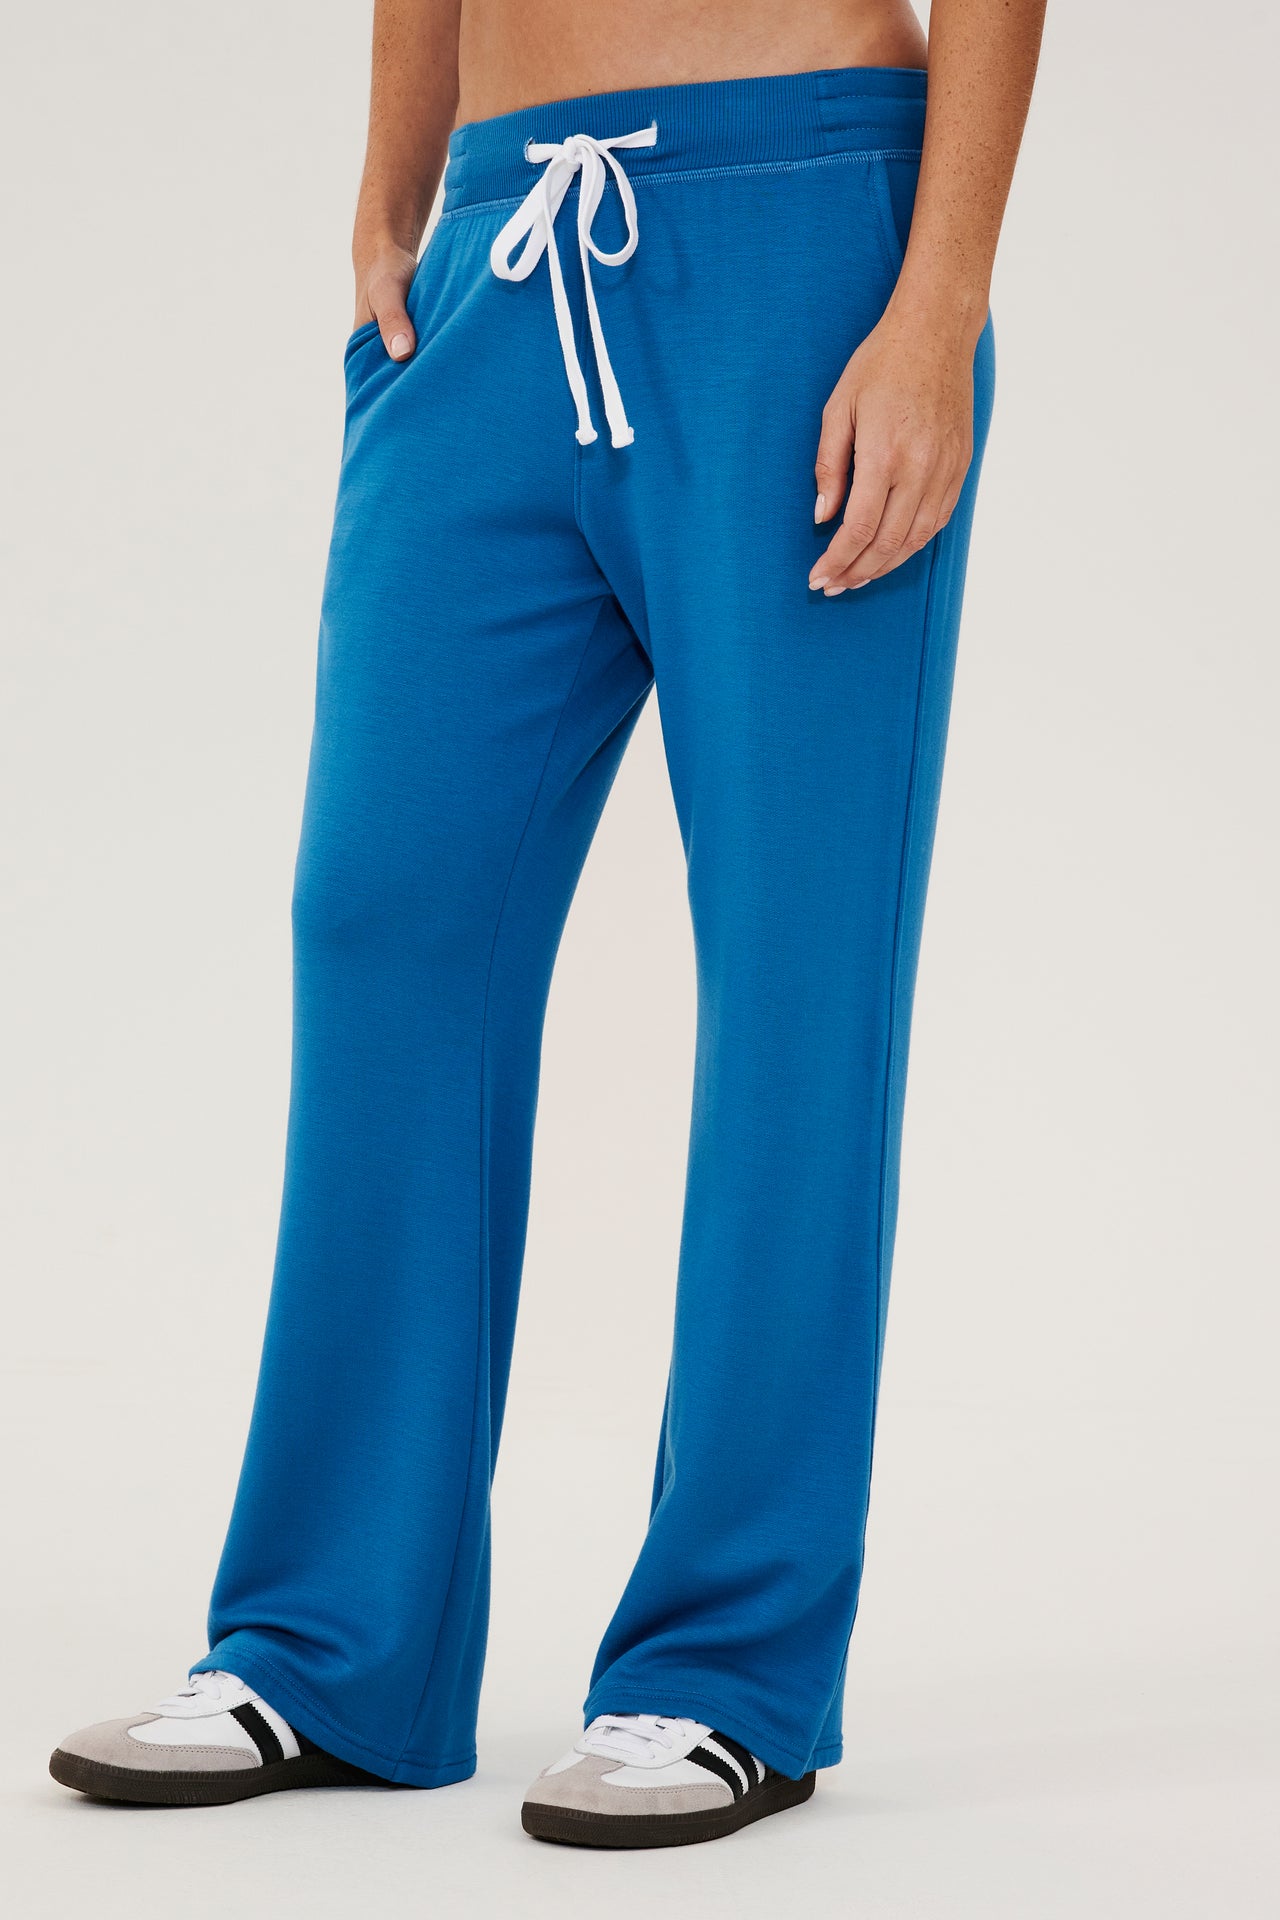 Front side view of woman wearing a bright blue high rise wide leg relaxed fit sweatpant with side pockets and white drawstring. Paired with white and grey shoes with black stripes.